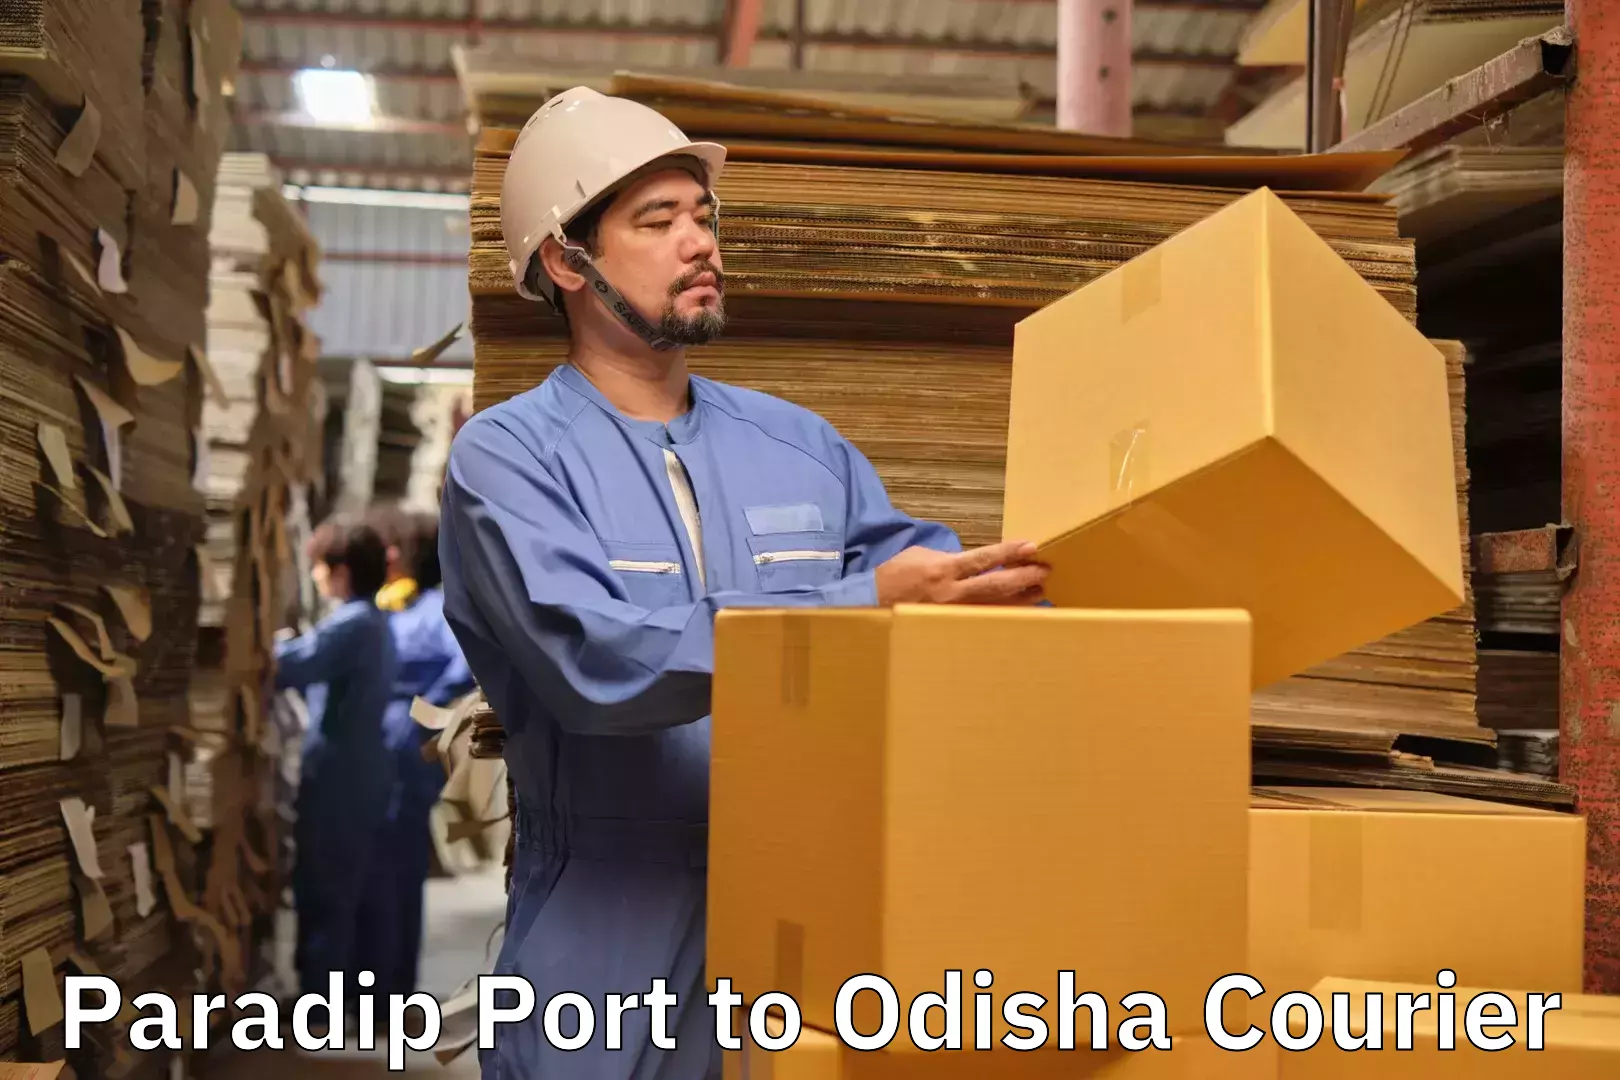 Train station baggage courier Paradip Port to Dandisahi